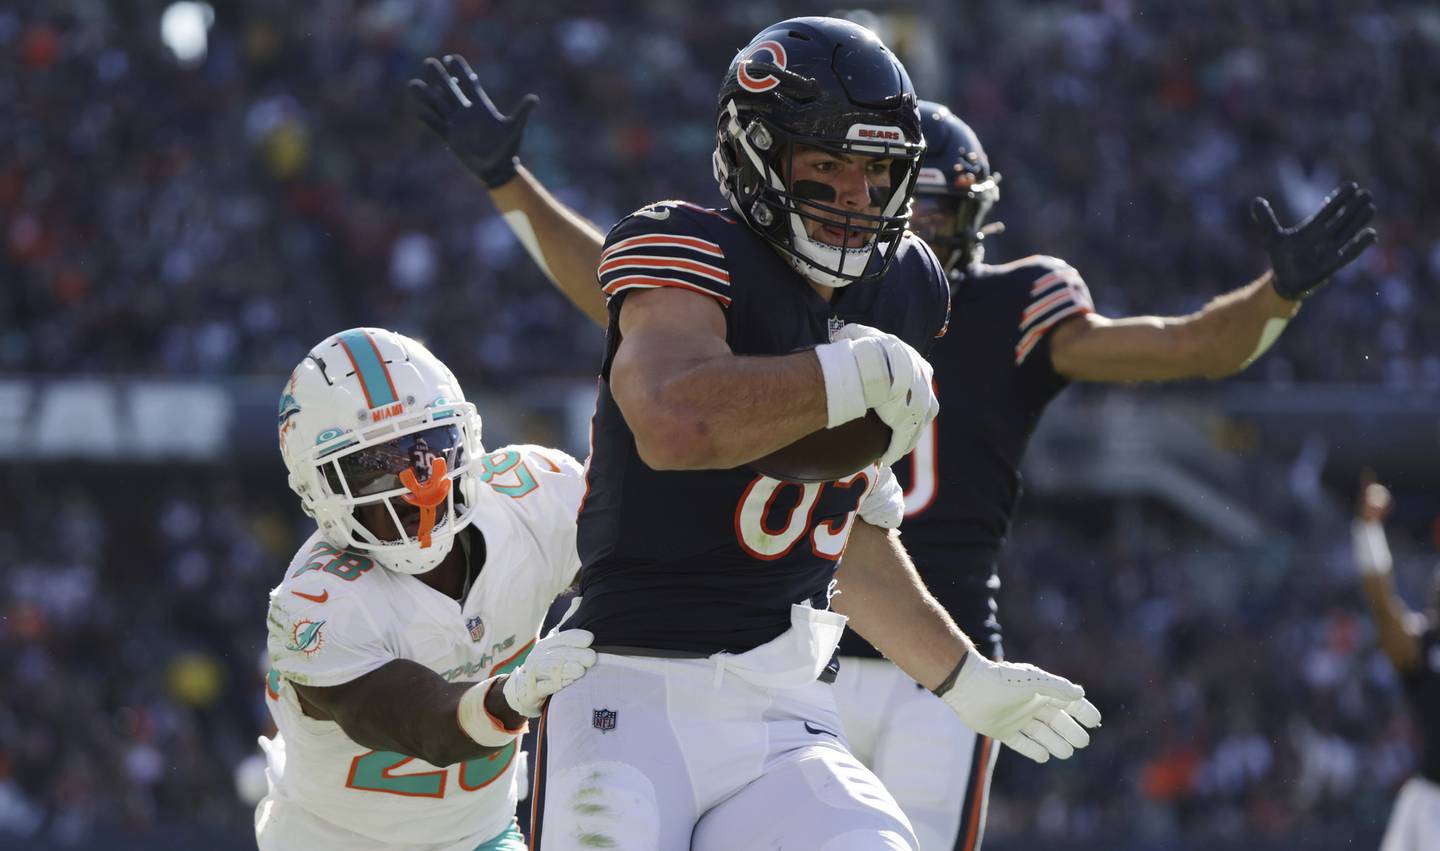 Bears tight end Cole Kmet (85) scores on a touchdown reception in the second quarter against the Dolphins on Sunday at Soldier Field. 